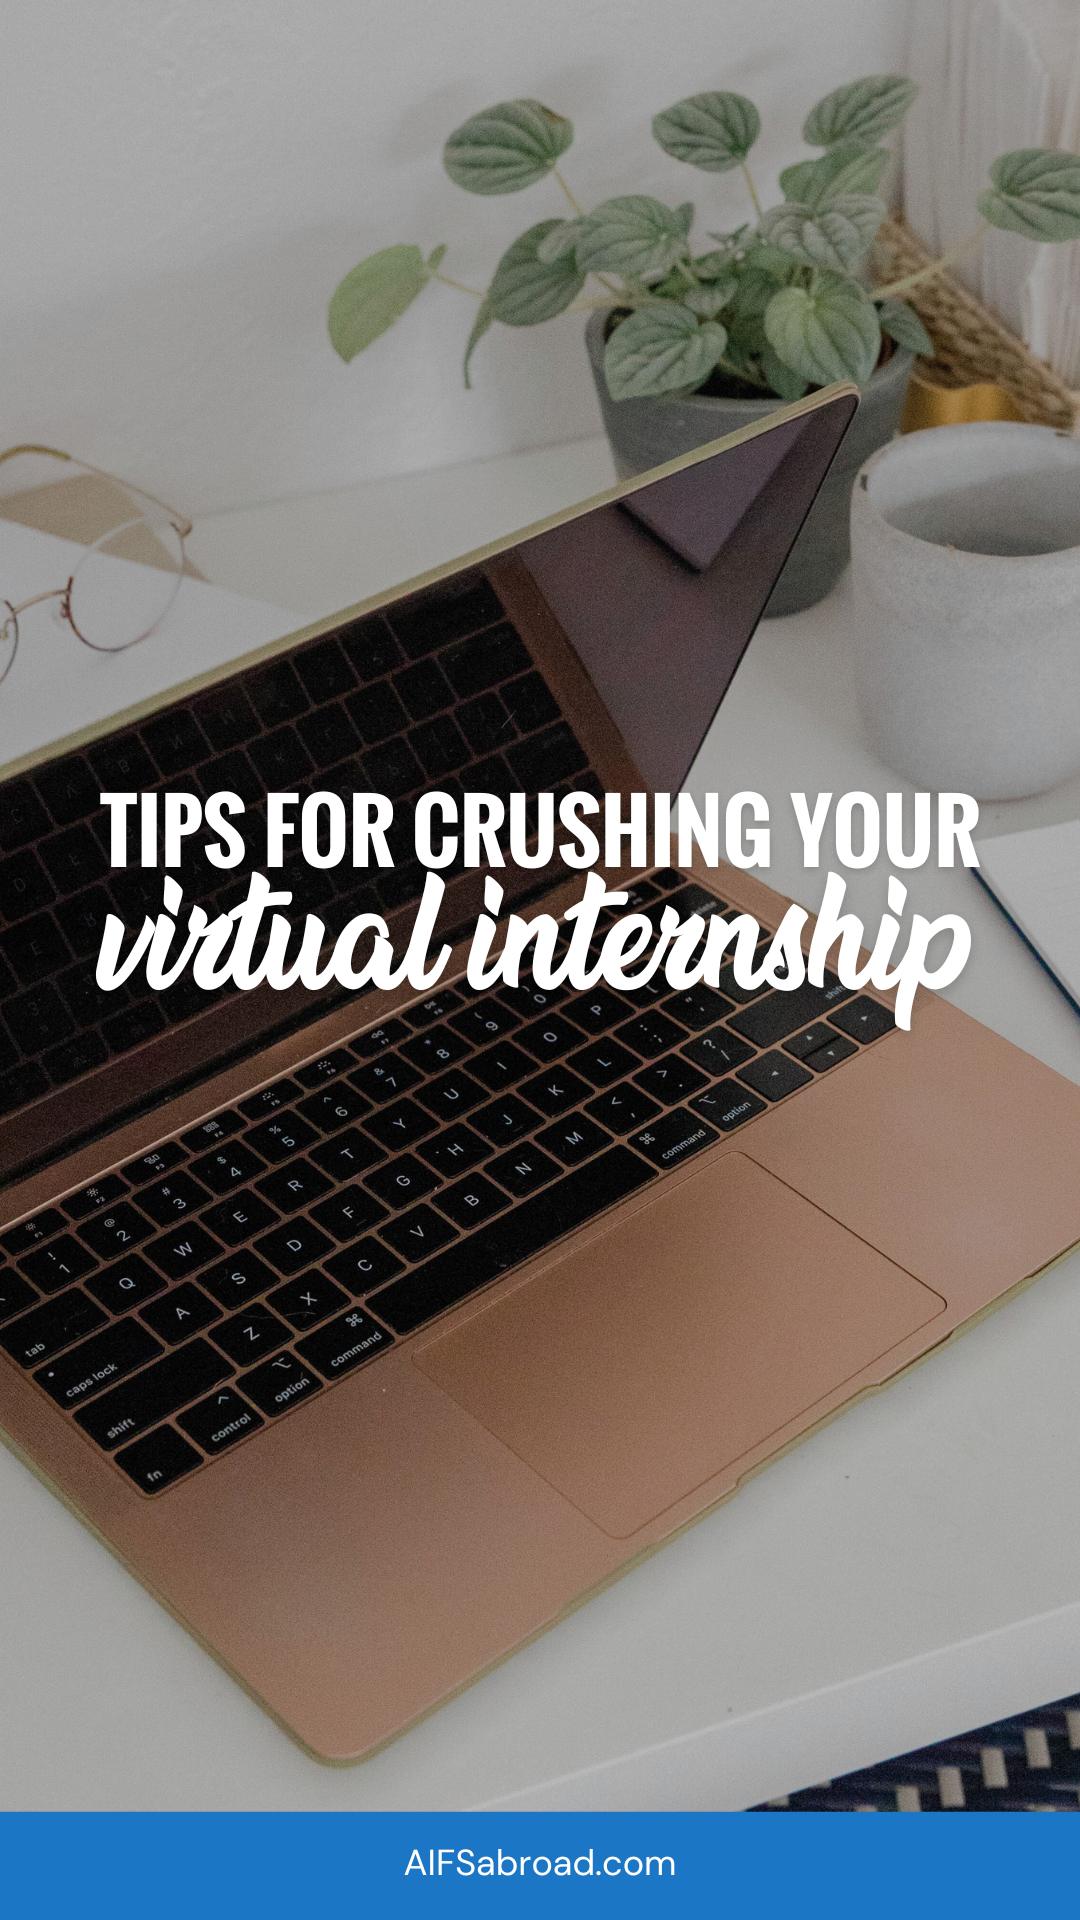 Rose gold laptop half closed with text "Tips for Crushing Your Virtual Internship - AIFS Abroad" - Pin Image